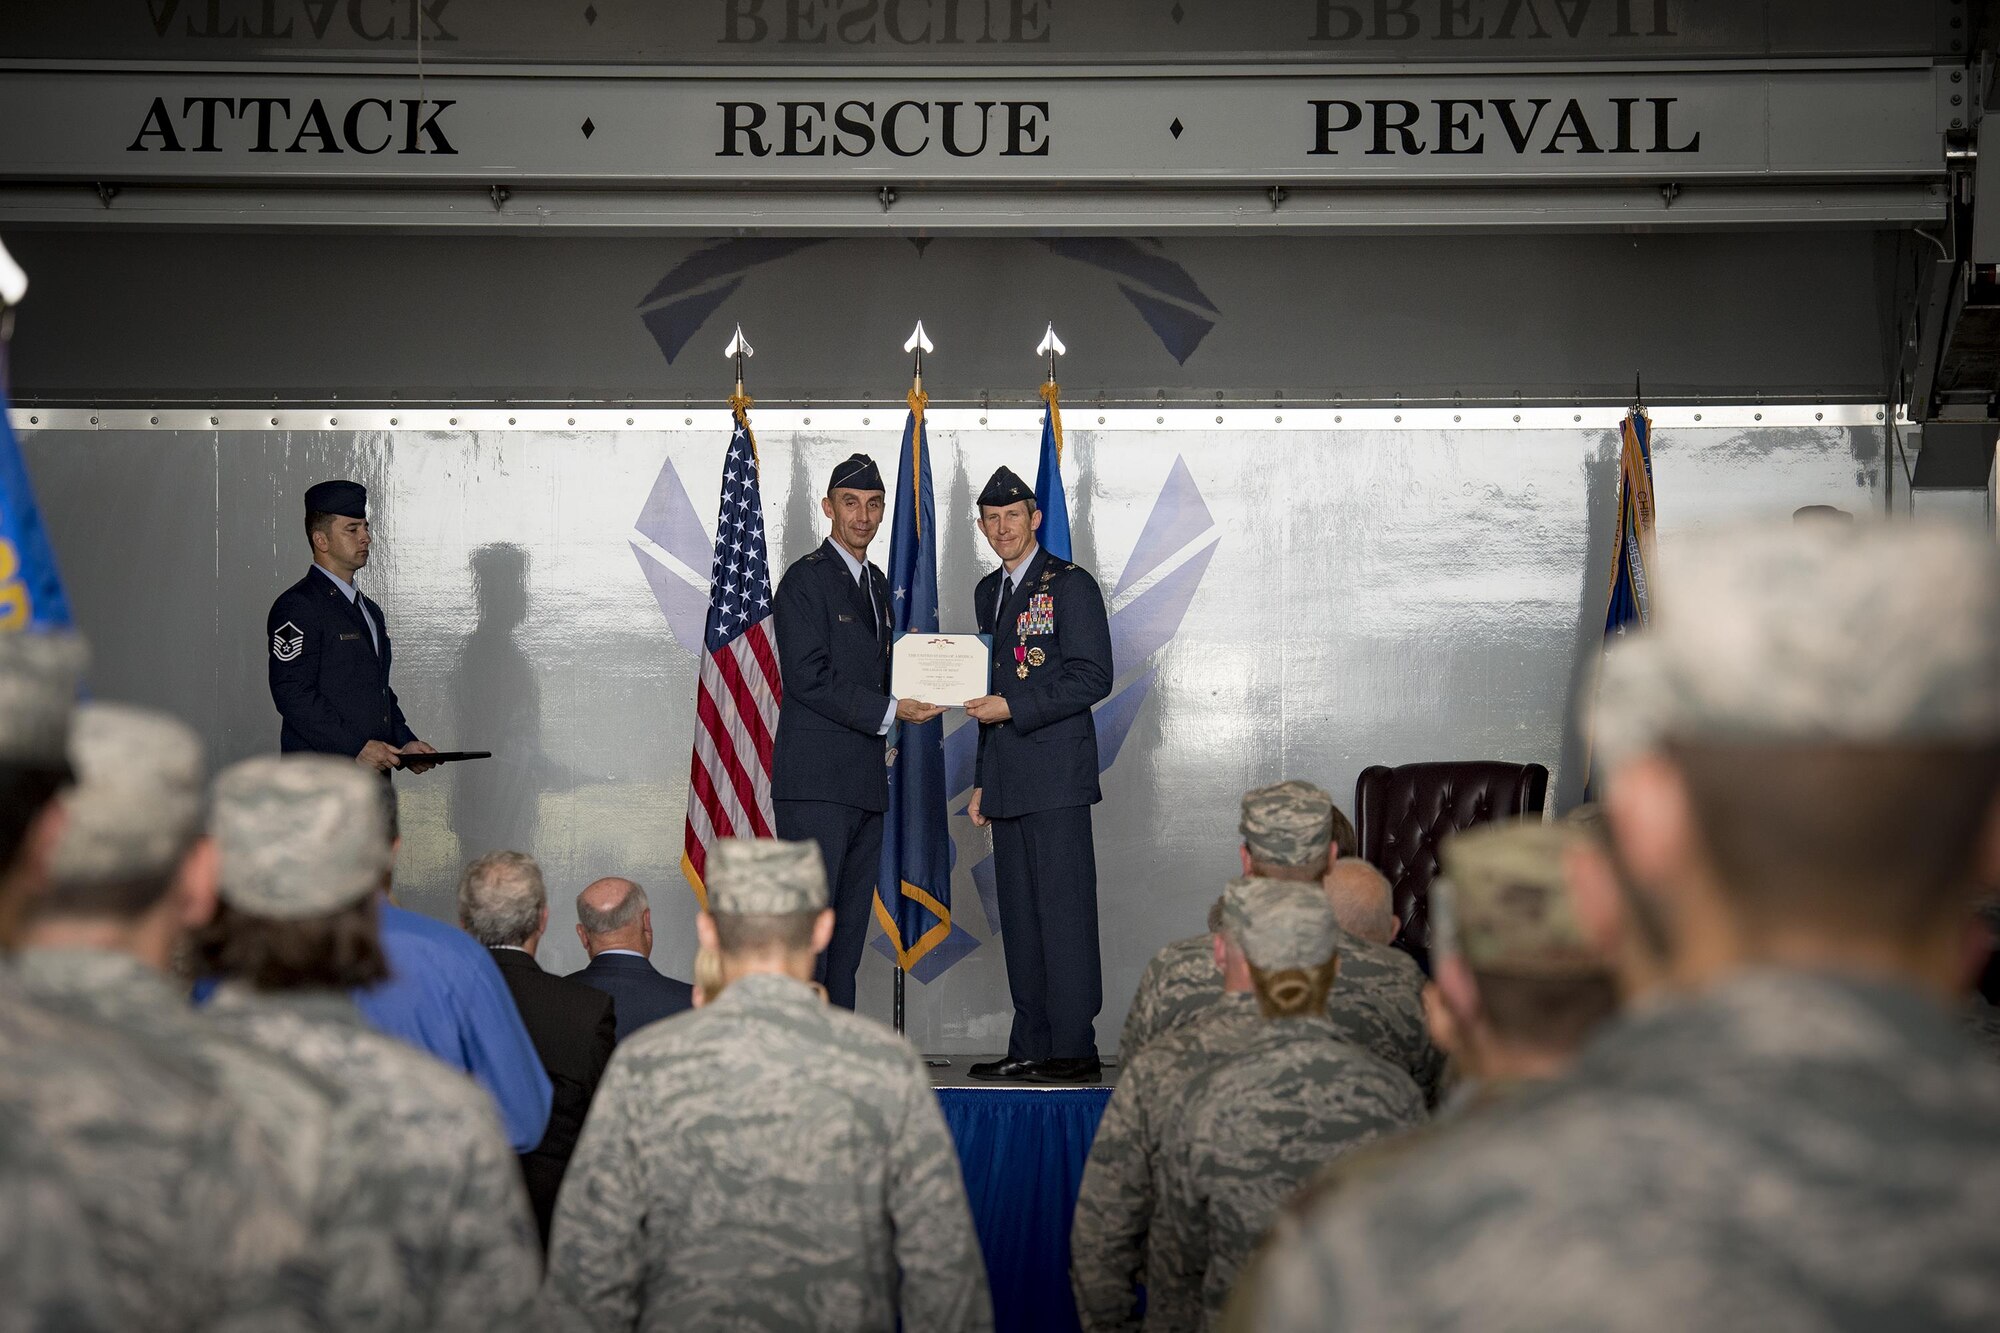 U.S. Air Force Maj. Gen. Scott J. Zobrist (left), 9th Air Force commander, presents the Legion of Merit award to Col. Thomas Kunkel, outgoing 23d Wing commander, during a change of command ceremony, July 10, 2017, at Moody Air Force Base, Ga. After giving up command of the 23d Wing, Kunkel will continue his career by serving as a Legislative Liaison at the Pentagon, Washington, D.C. (U.S. Air Force photo by Staff Sgt. Ryan Callaghan)
